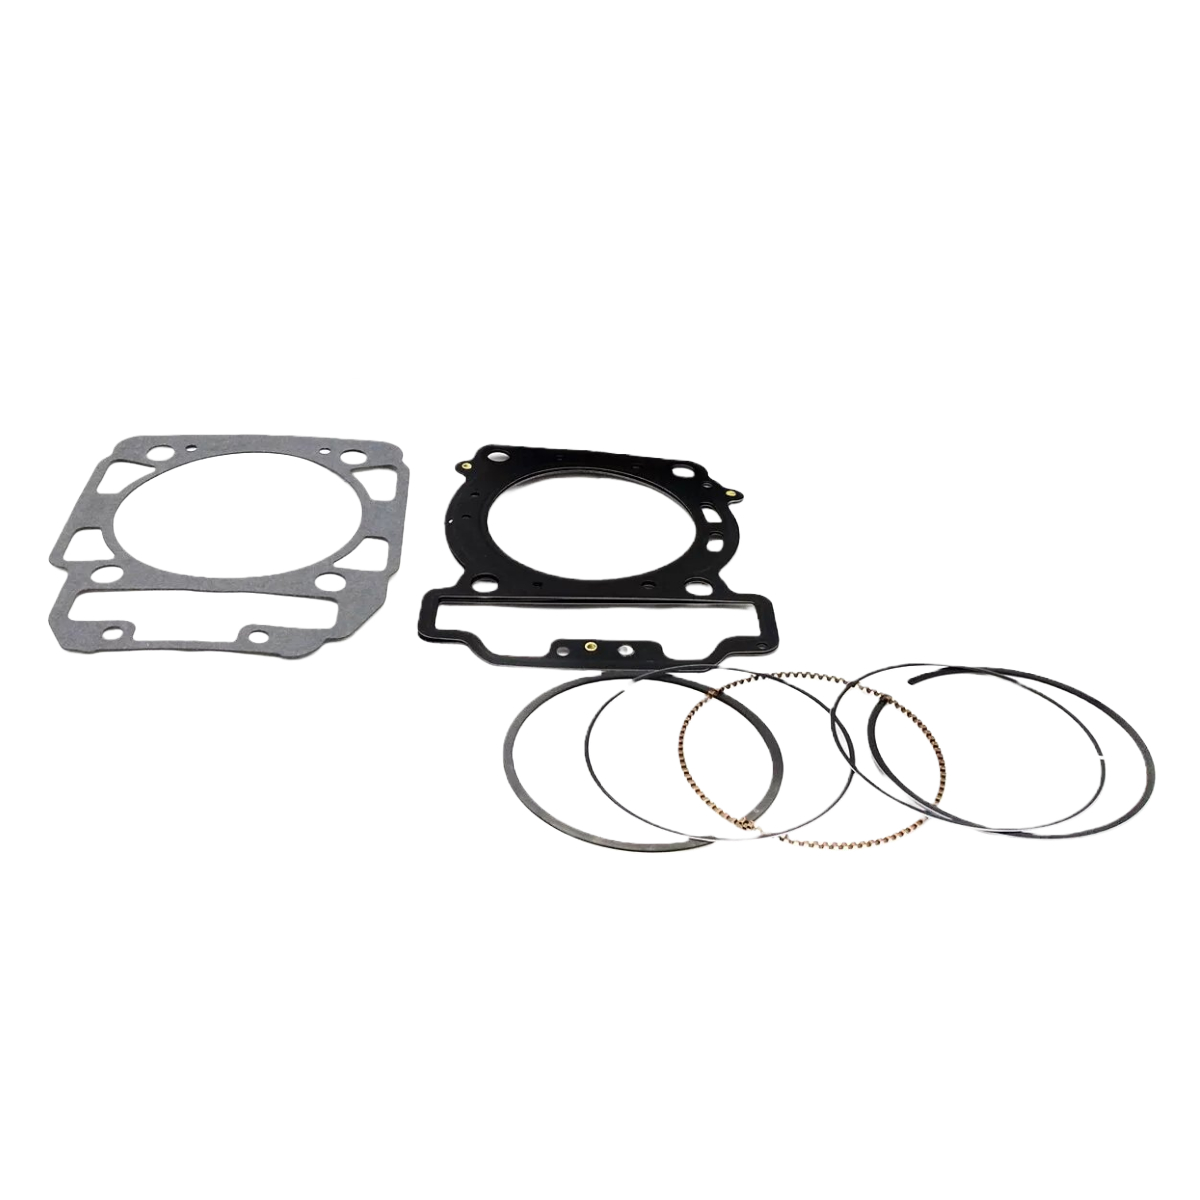 CFORCE 500 (22-24) TOP END RING AND GASKET KIT